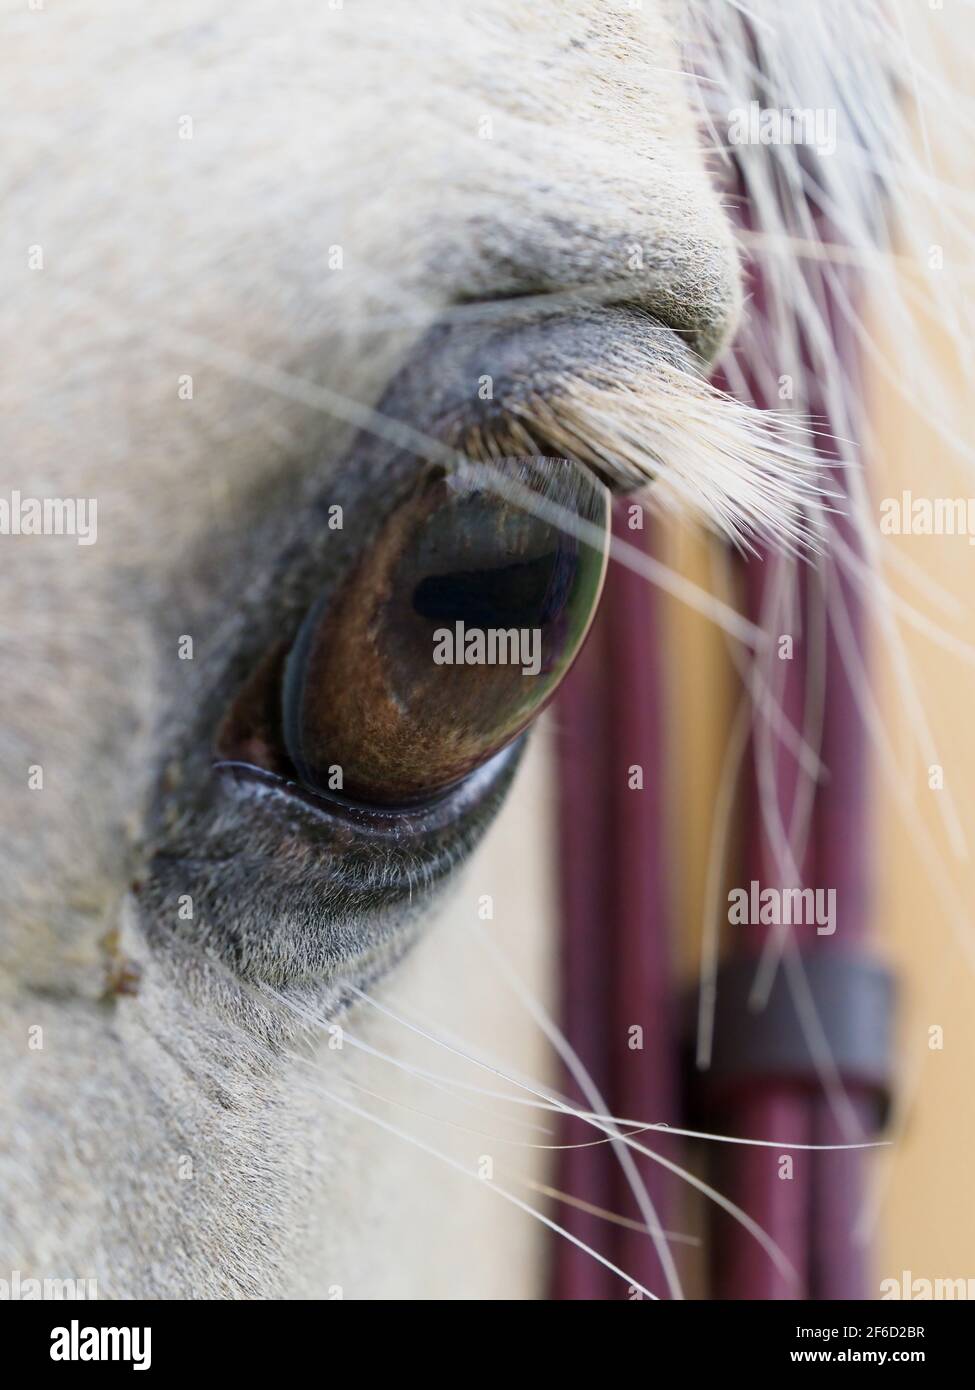 A close up shot of the eye and side of the face of a grey horse. Stock Photo